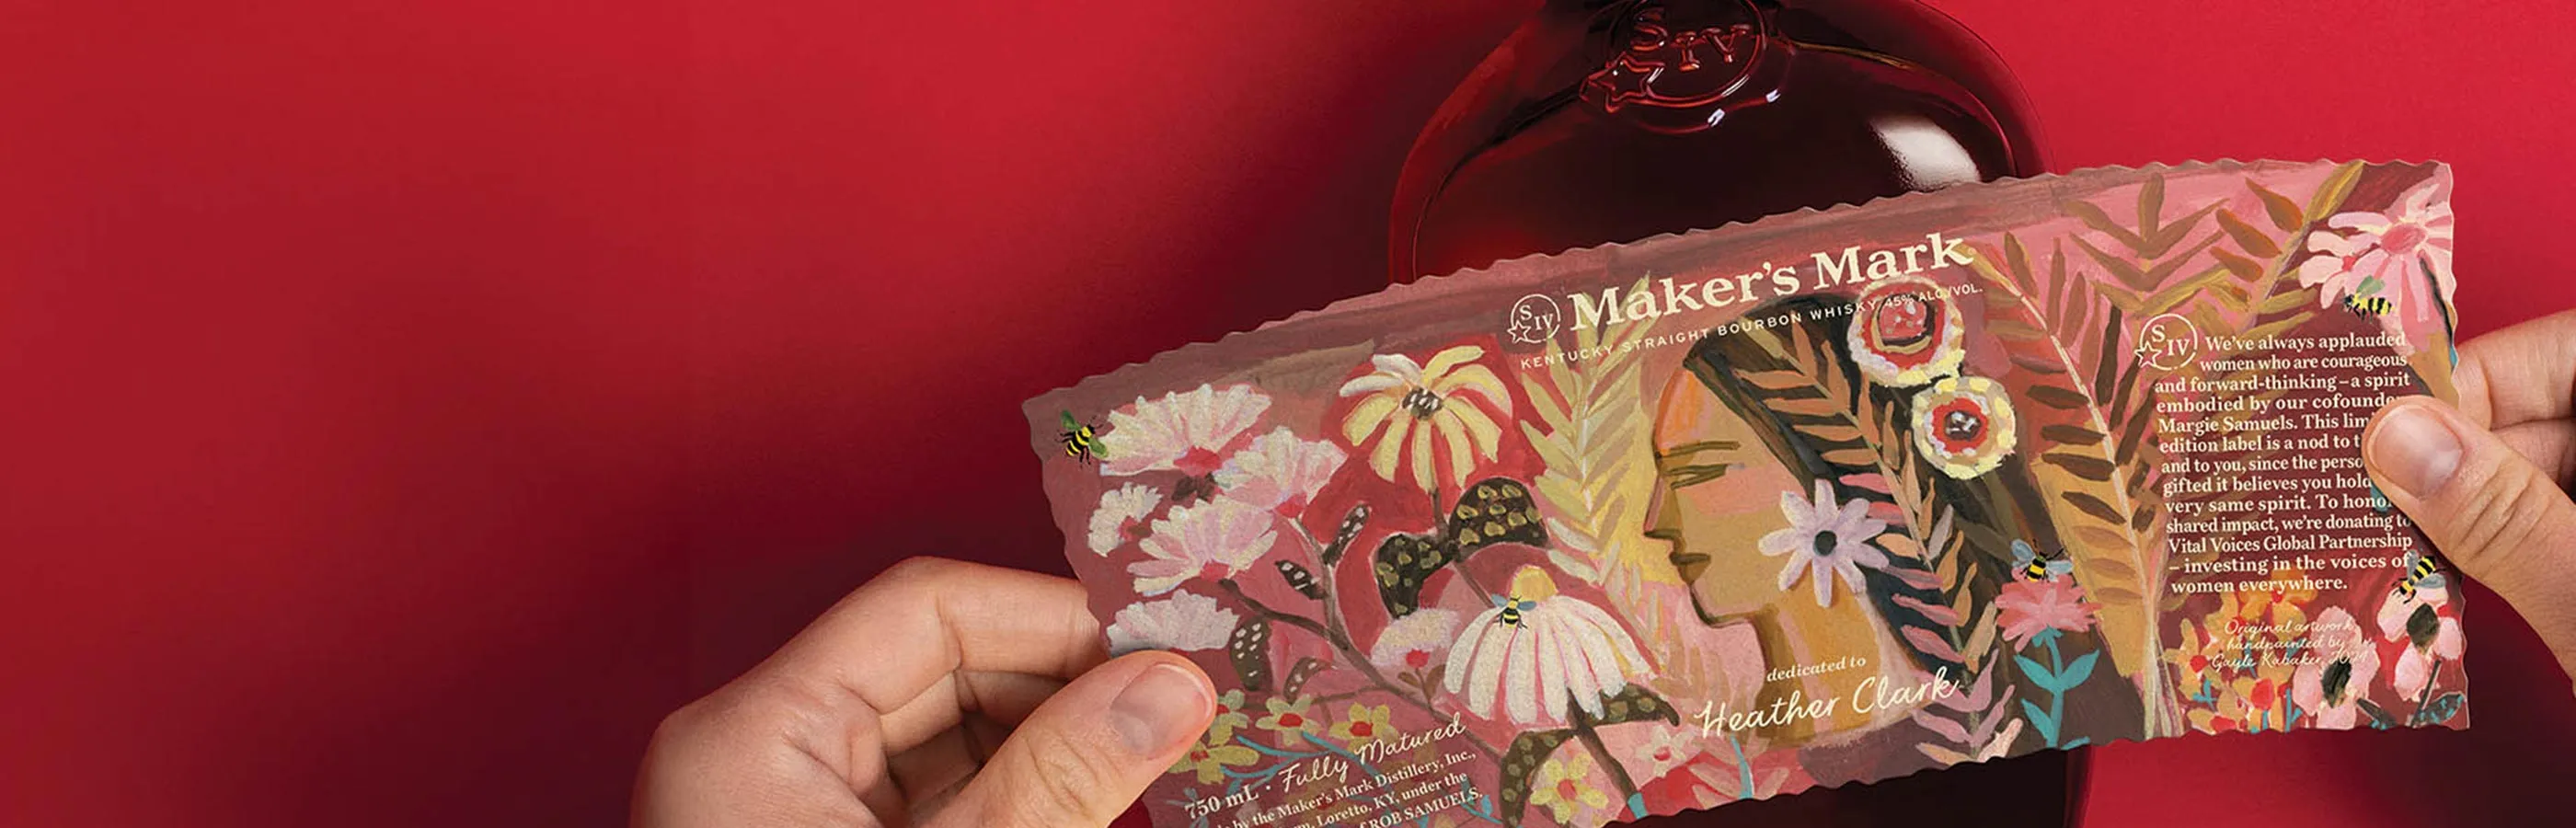 Maker’s Mark® Bourbon Calls Consumers to Recognize ‘Spirited Women’ with Personalized, Limited-Edition Label 